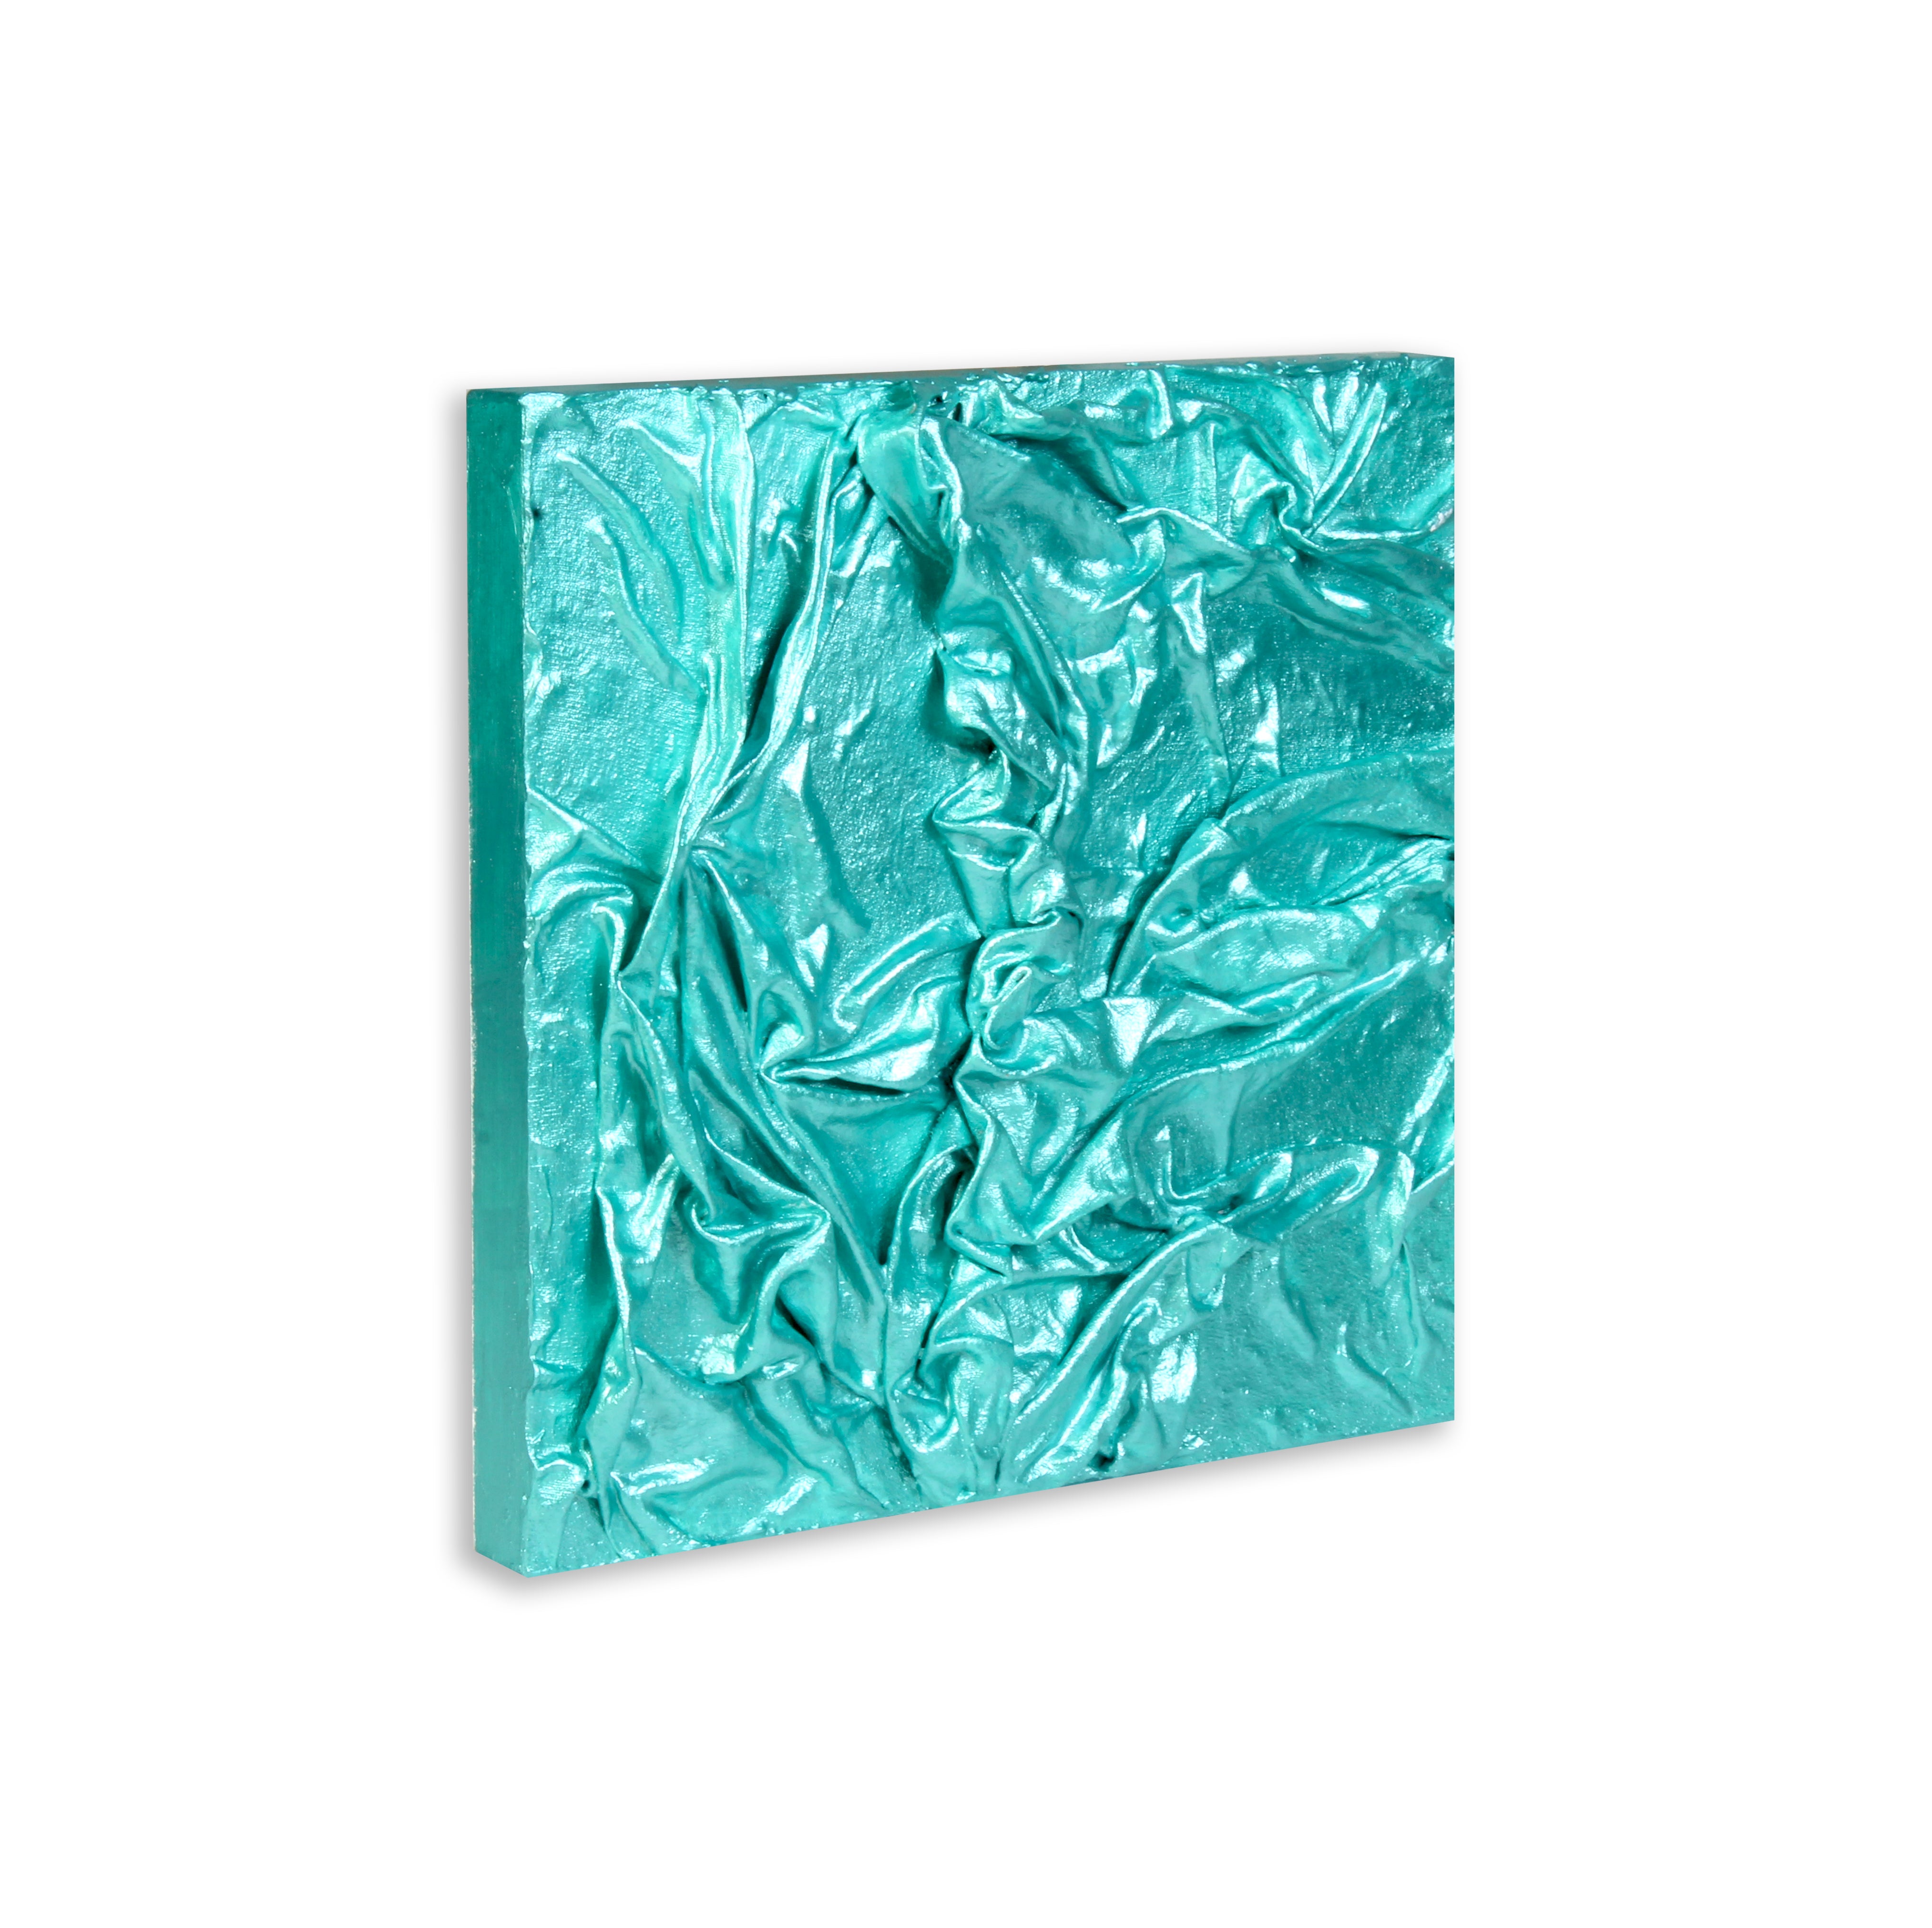 Wall Decor Faux Leather Art Carribean Teal Approx H12 X L12 X D0.78inch 1pc